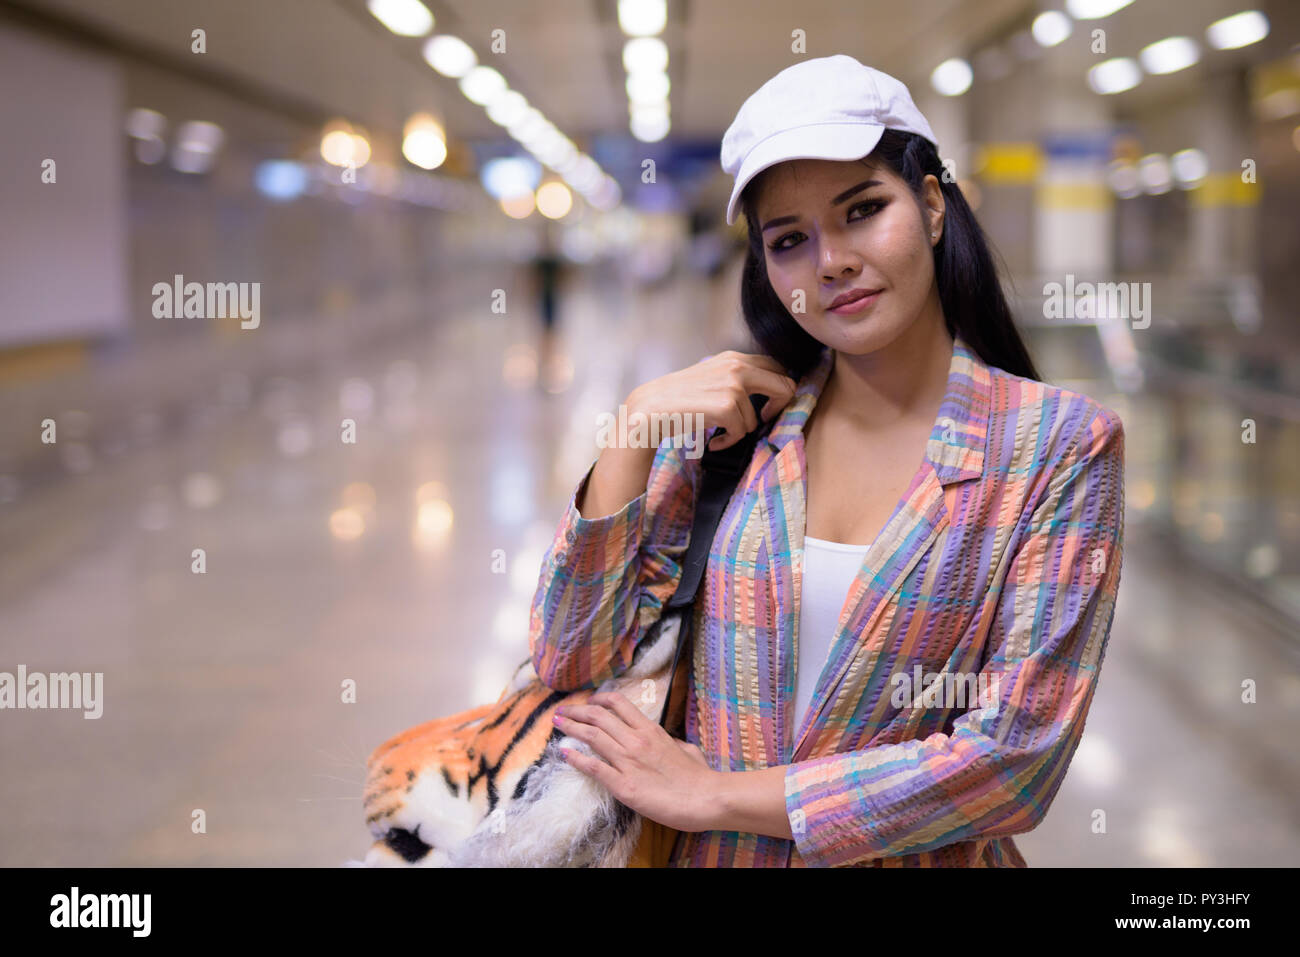 Portrait of Asian tourist woman in train station Stock Photo